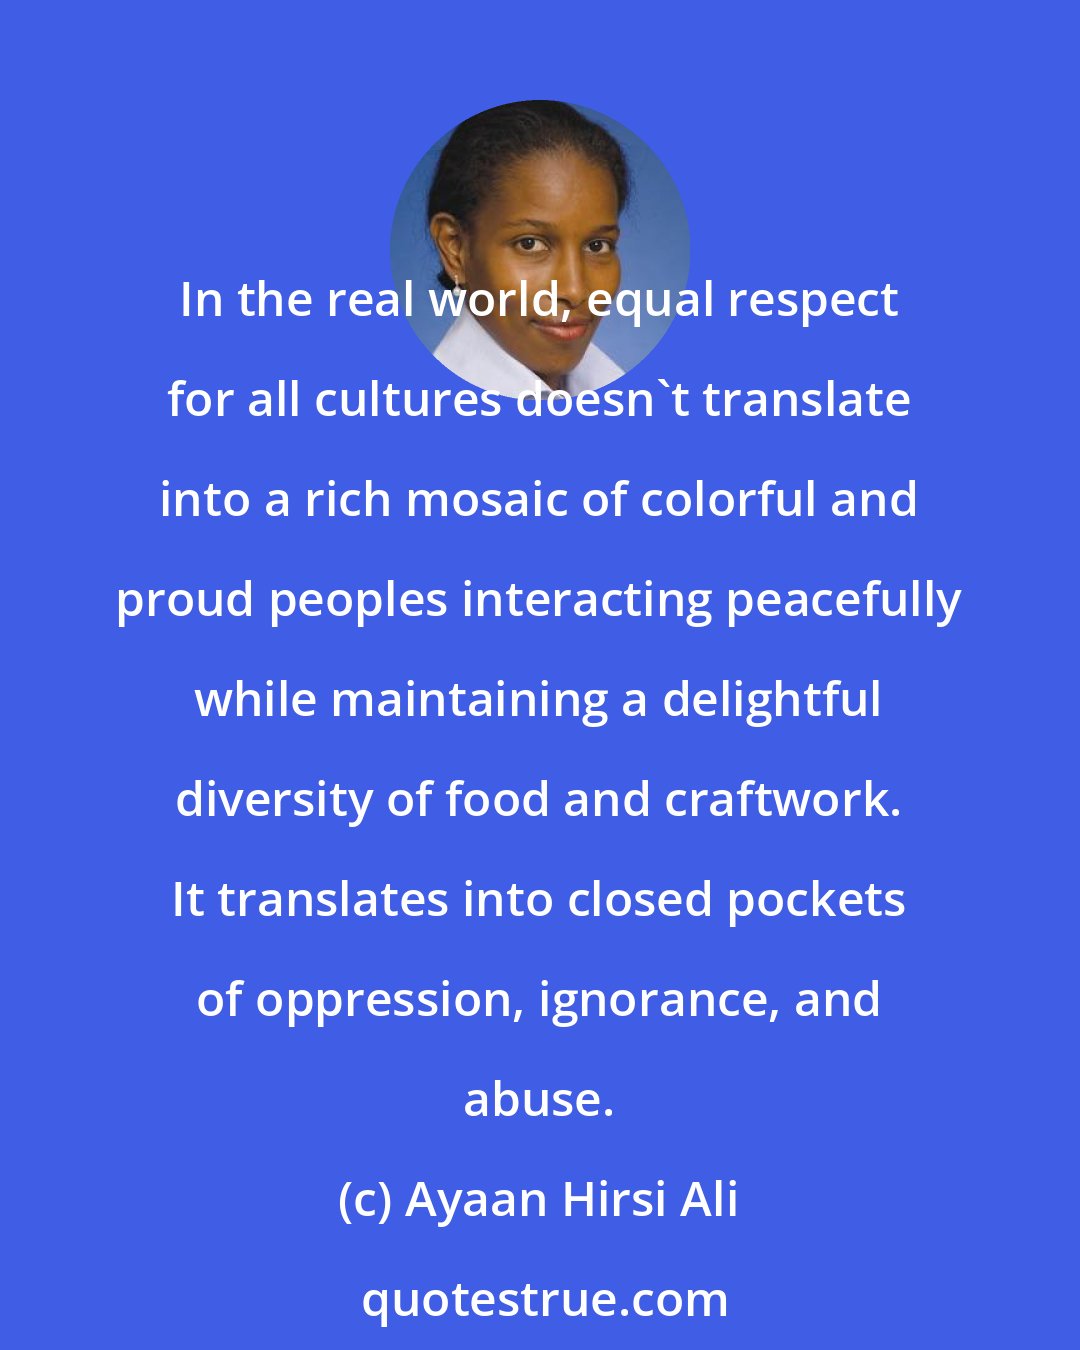 Ayaan Hirsi Ali: In the real world, equal respect for all cultures doesn't translate into a rich mosaic of colorful and proud peoples interacting peacefully while maintaining a delightful diversity of food and craftwork. It translates into closed pockets of oppression, ignorance, and abuse.